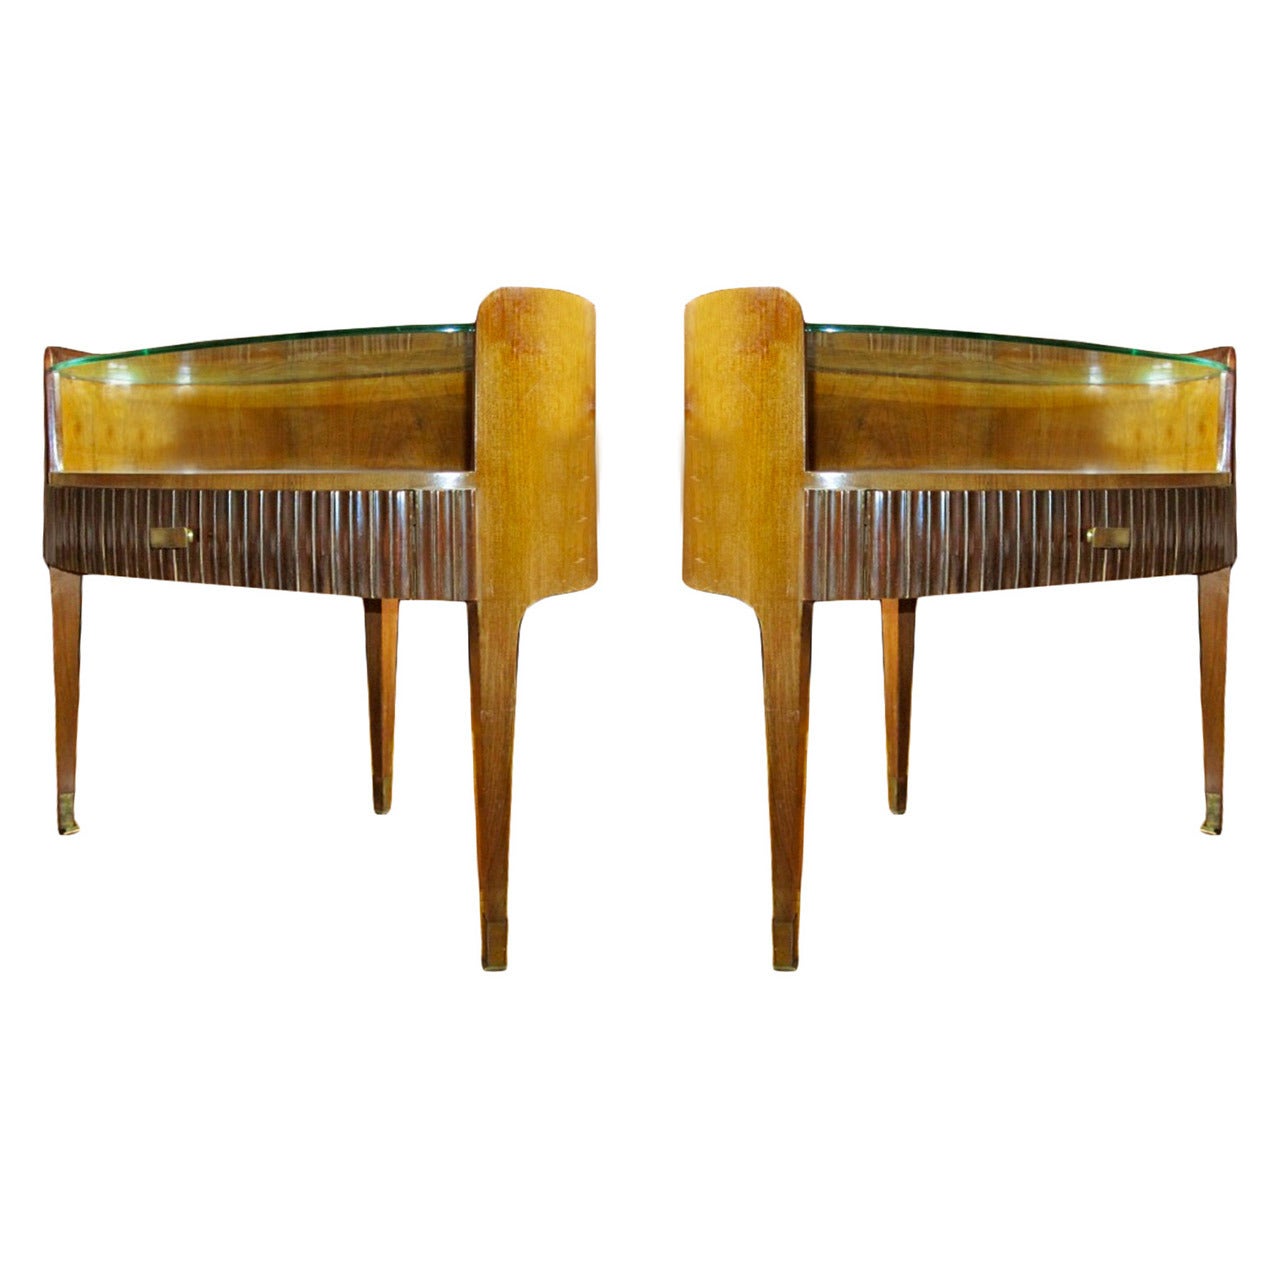 Beautiful Pair of Bedside Tables, Designed by Paolo Buffa